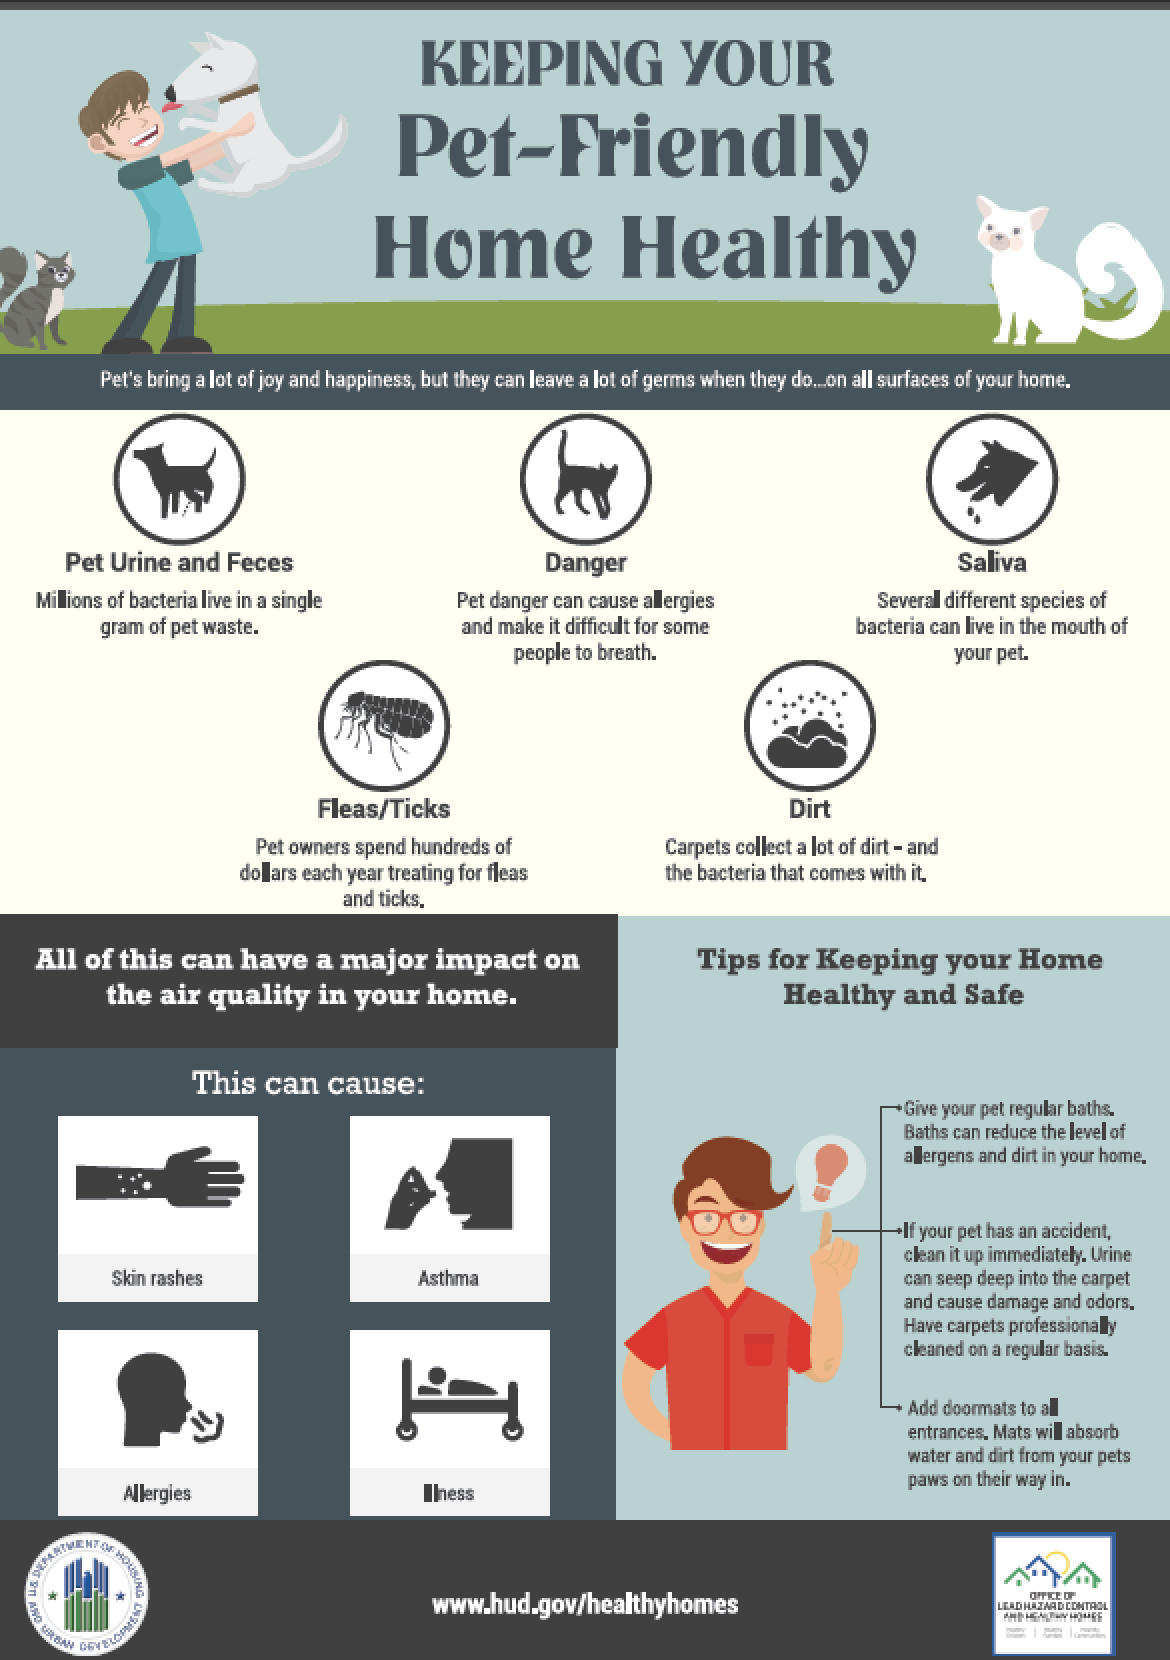 How to Make Your Home Pet-Friendly